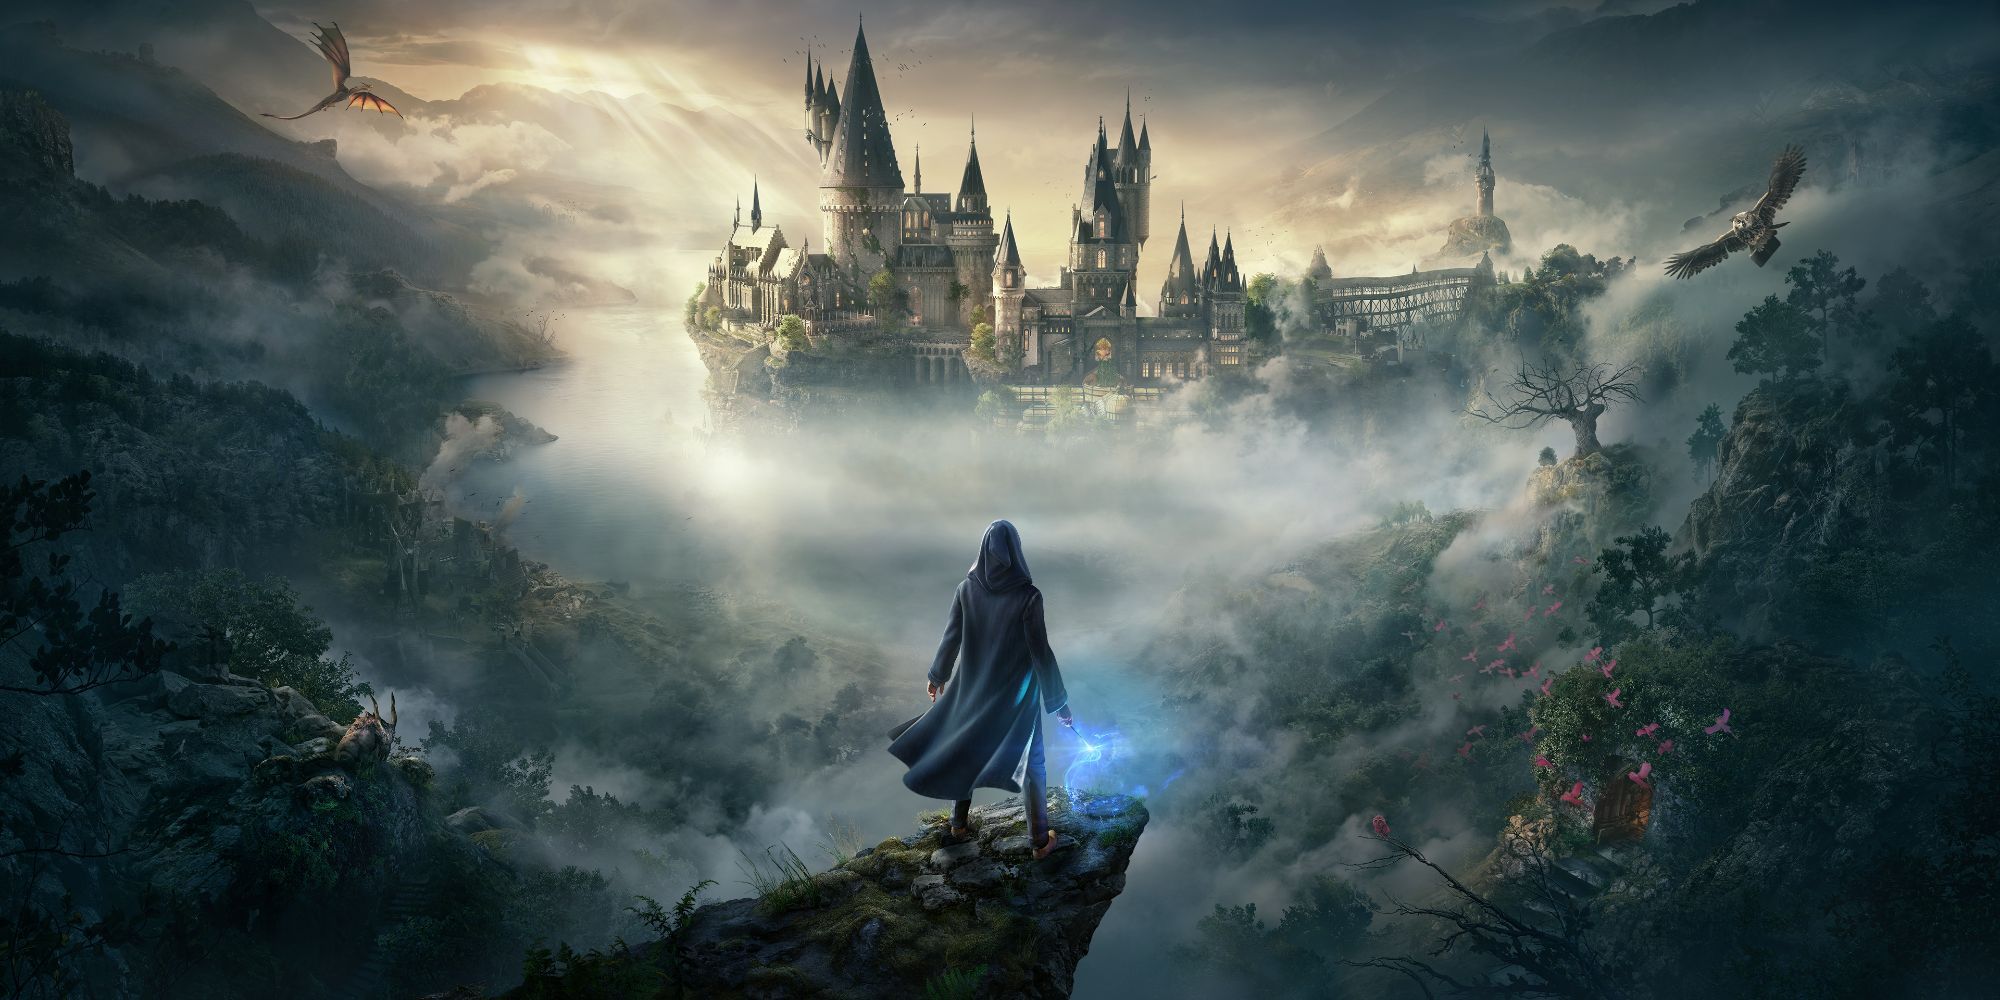 image from the game Hogwarts Legacy showing a wizard looking over Hogwarts Castle surrounded by mist